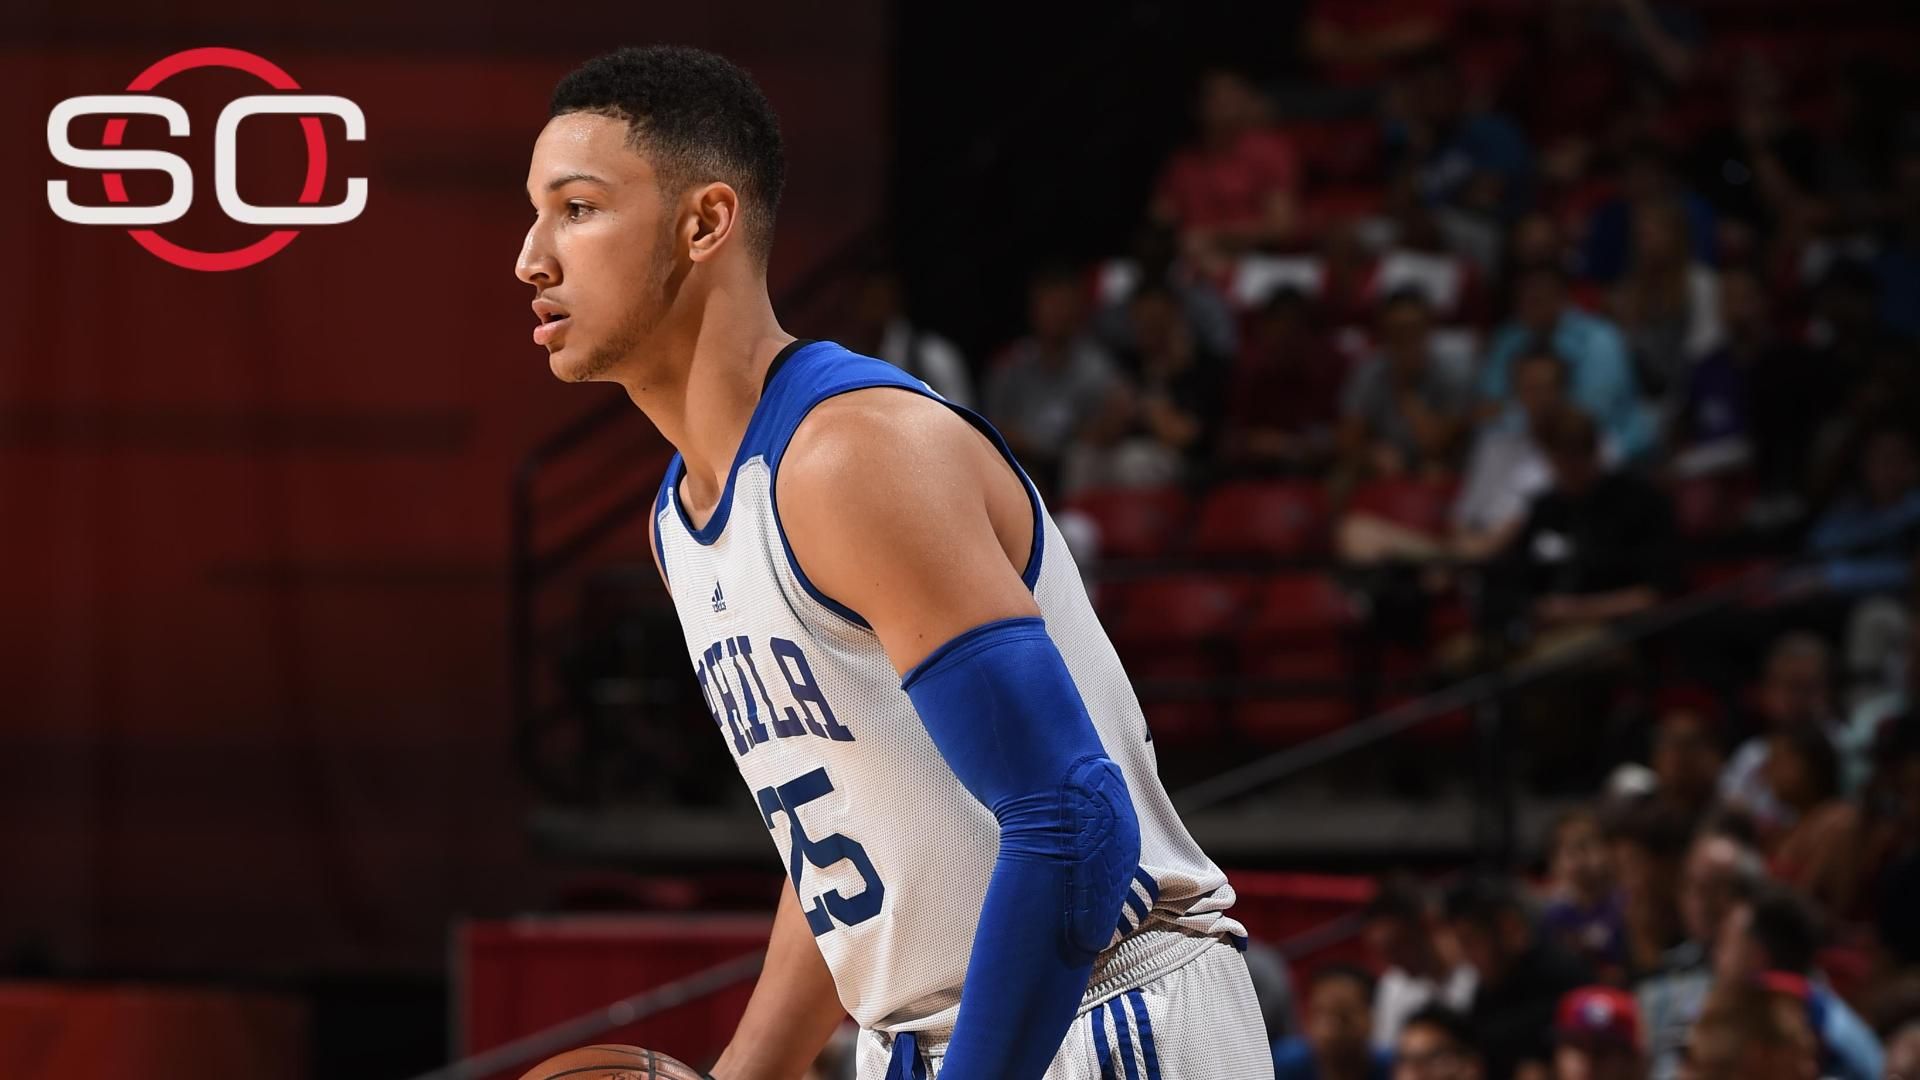 Simmons scores 18 in loss to Bulls